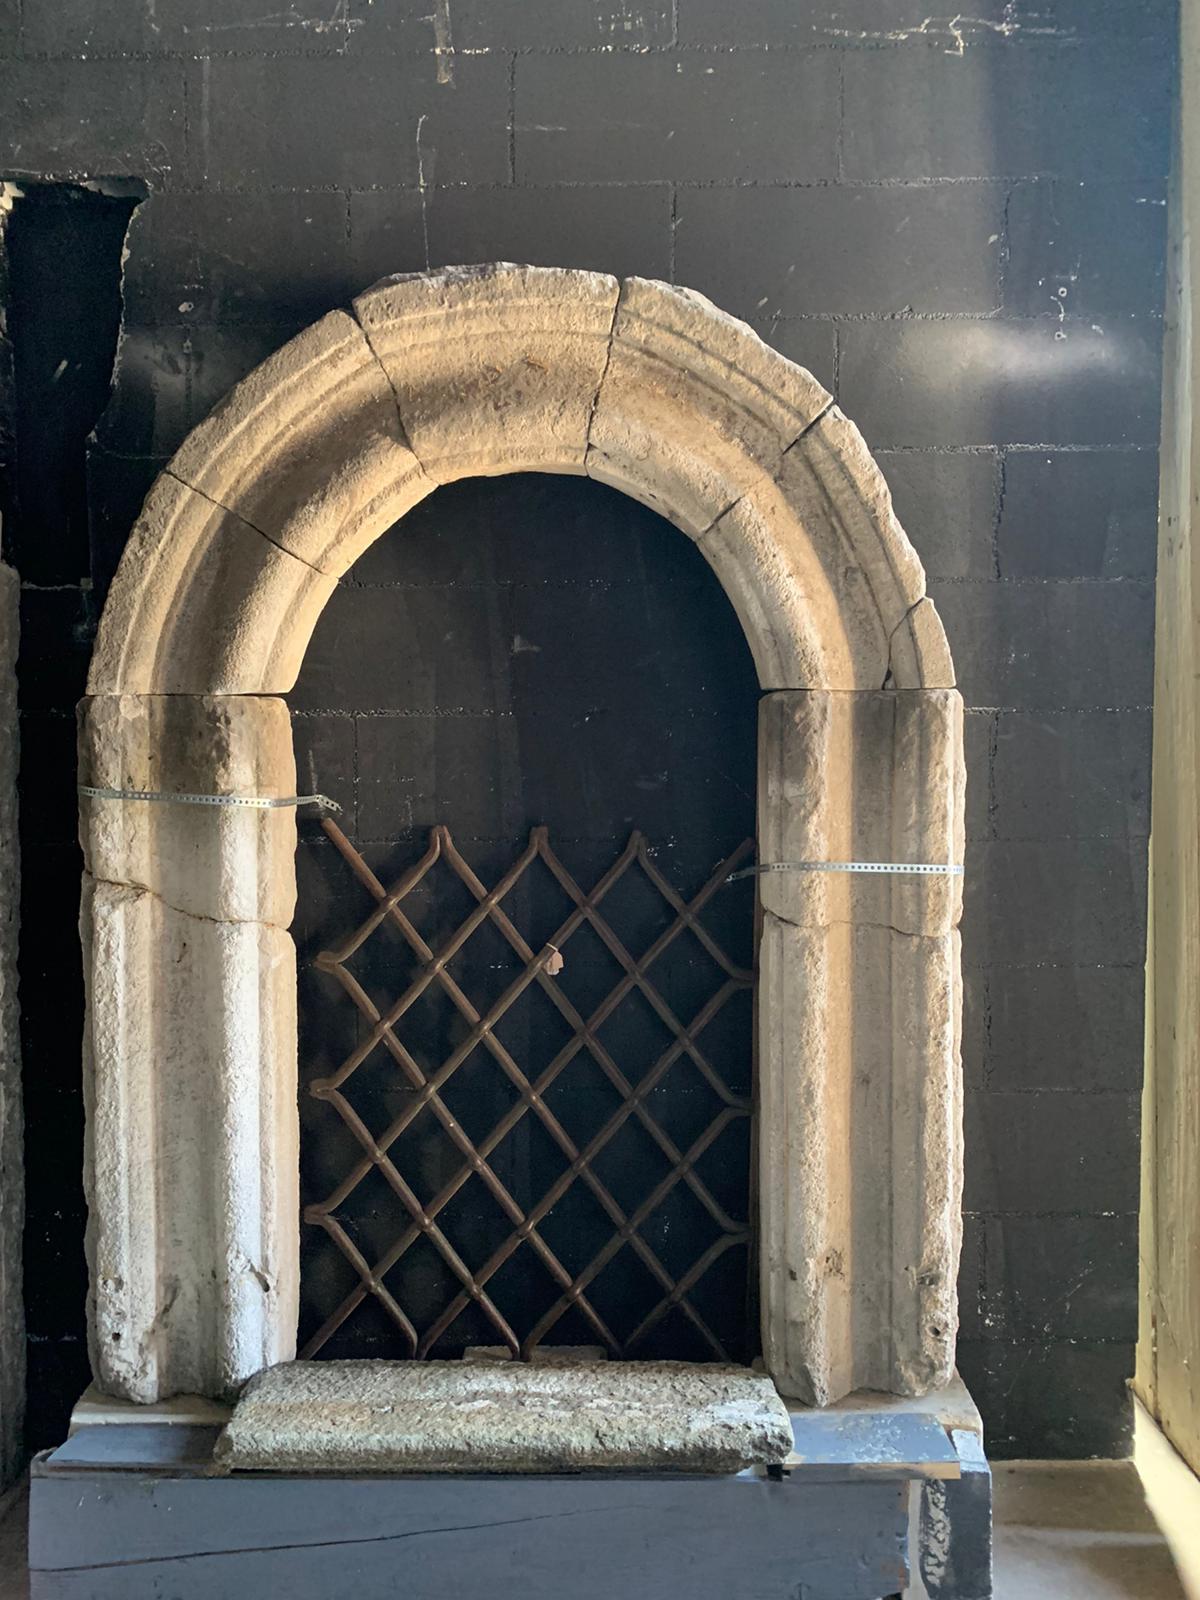 Ancient portal / window frame, built and hand-sculpted in grey stone, with arched shape, from the seventeenth century, built in Italy by a craftsman for a historic building.
Maximum size cm W 130 x H 165 x T 17, the internal passage measures cm W